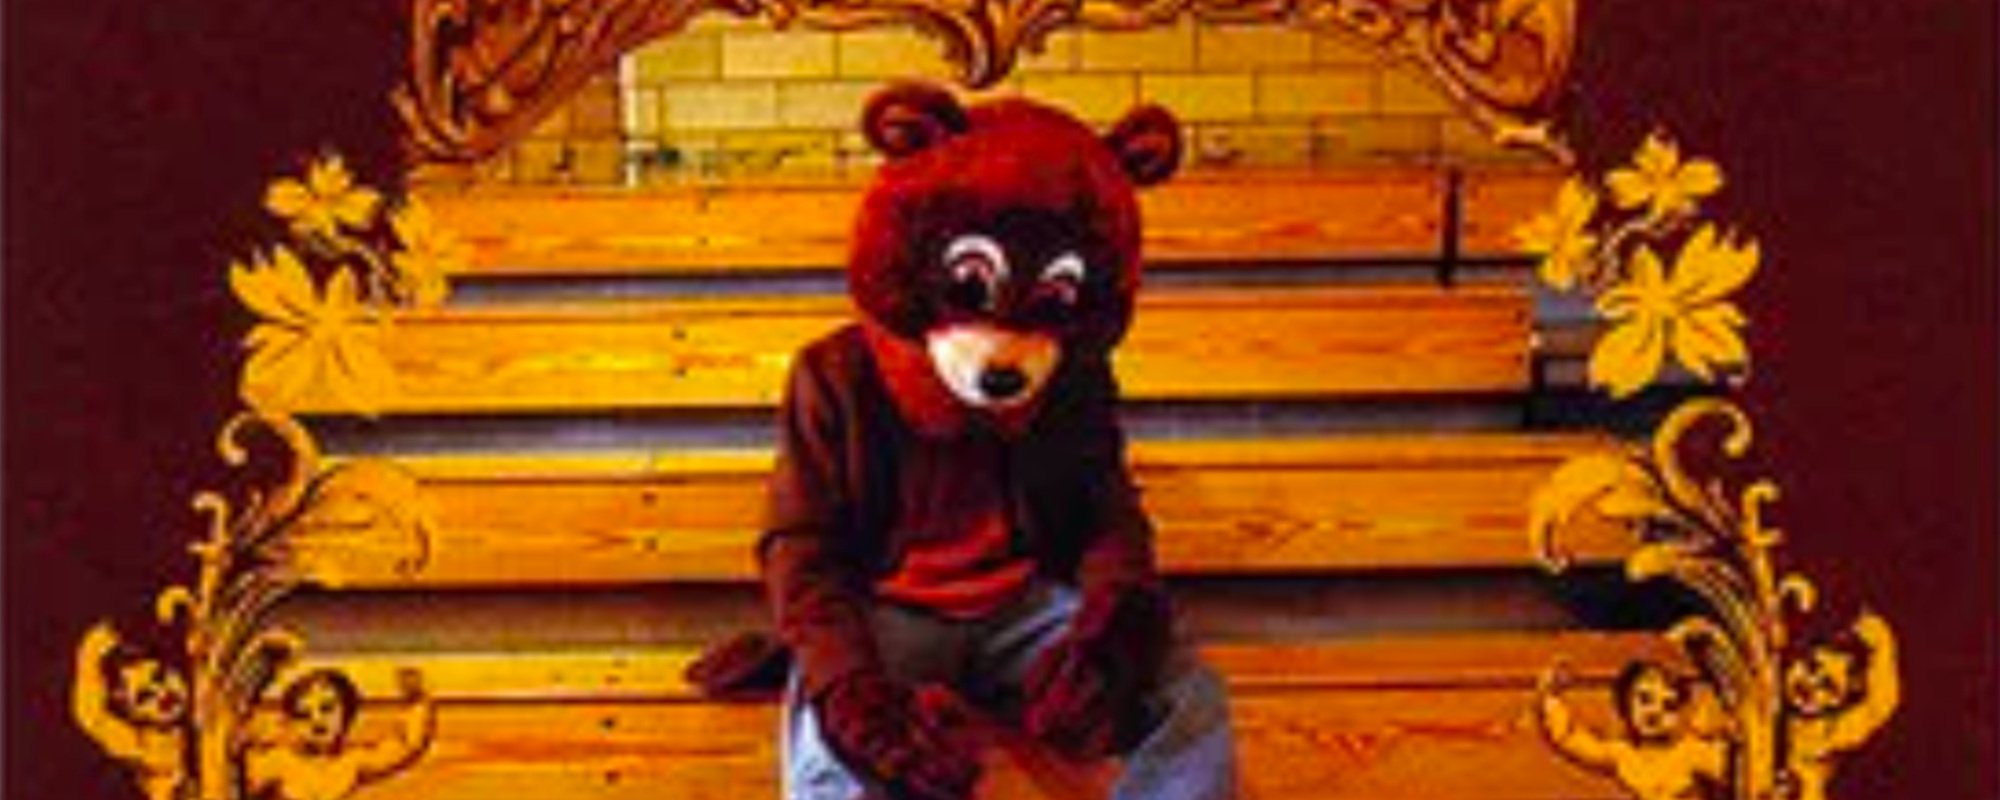 The Story Behind the Bear on Kanye West's 'College Dropout' Album Cover